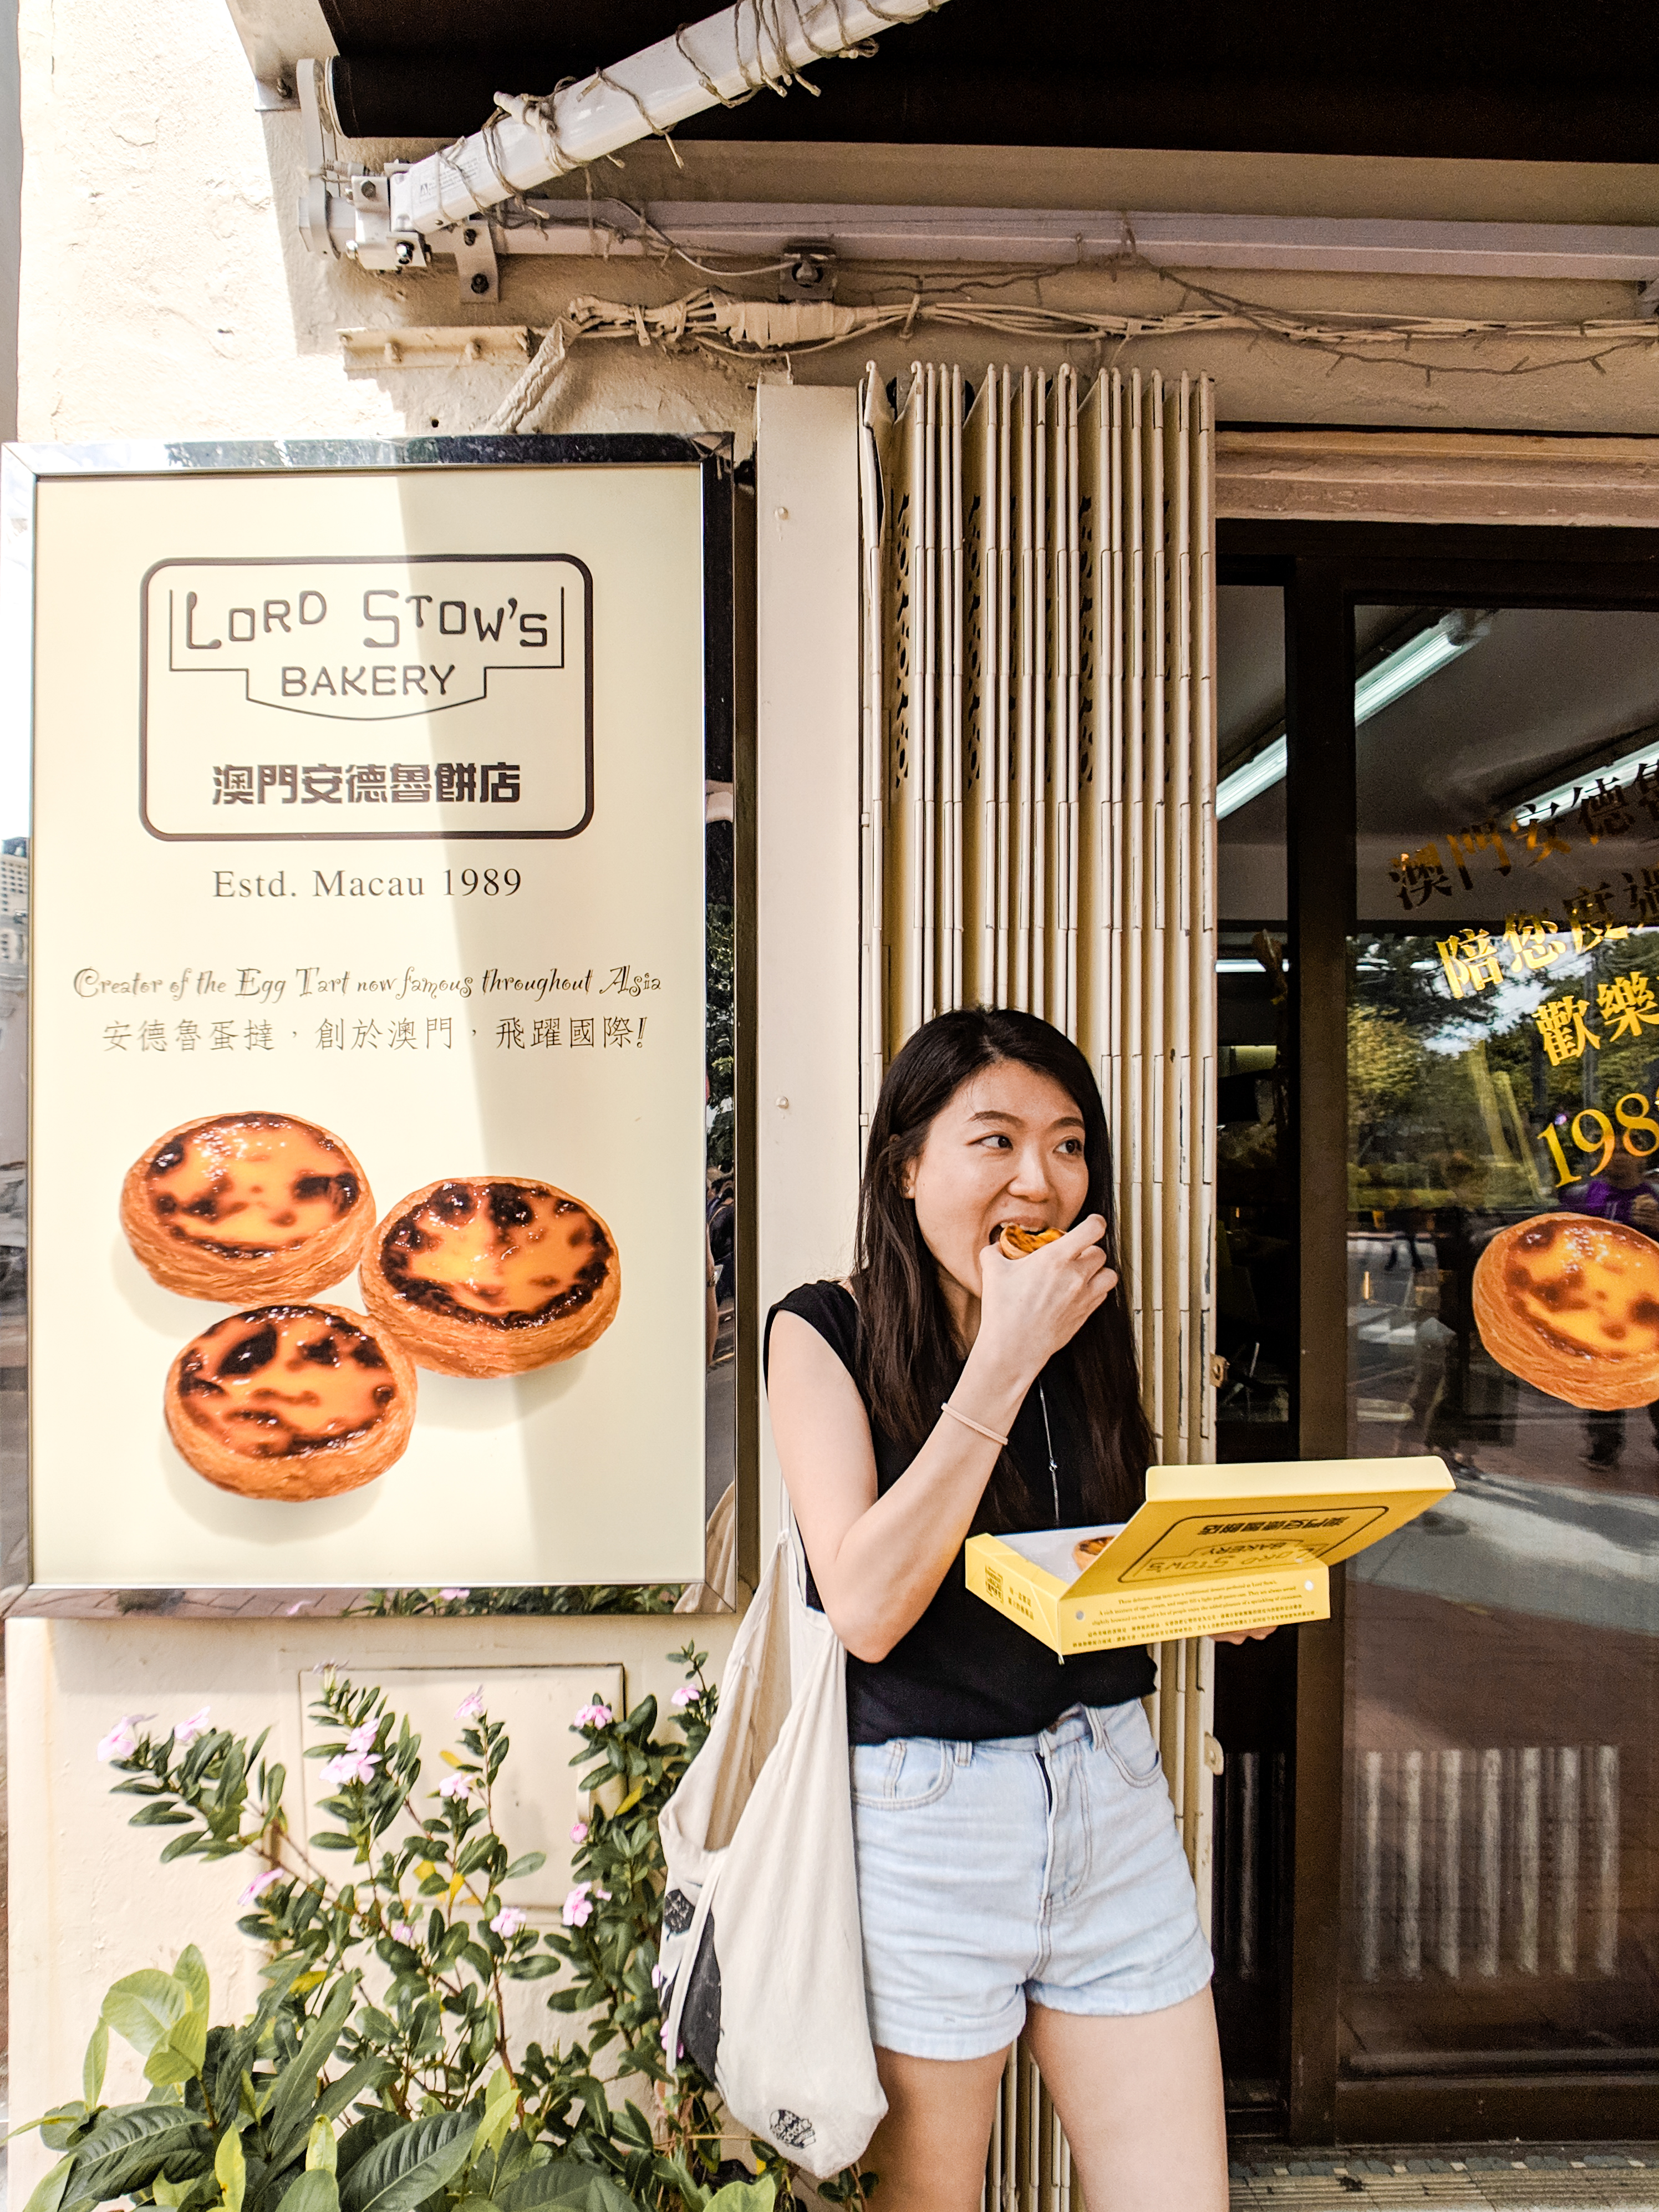 8.Macao Portuguese Tart at Lord Stow original bakery